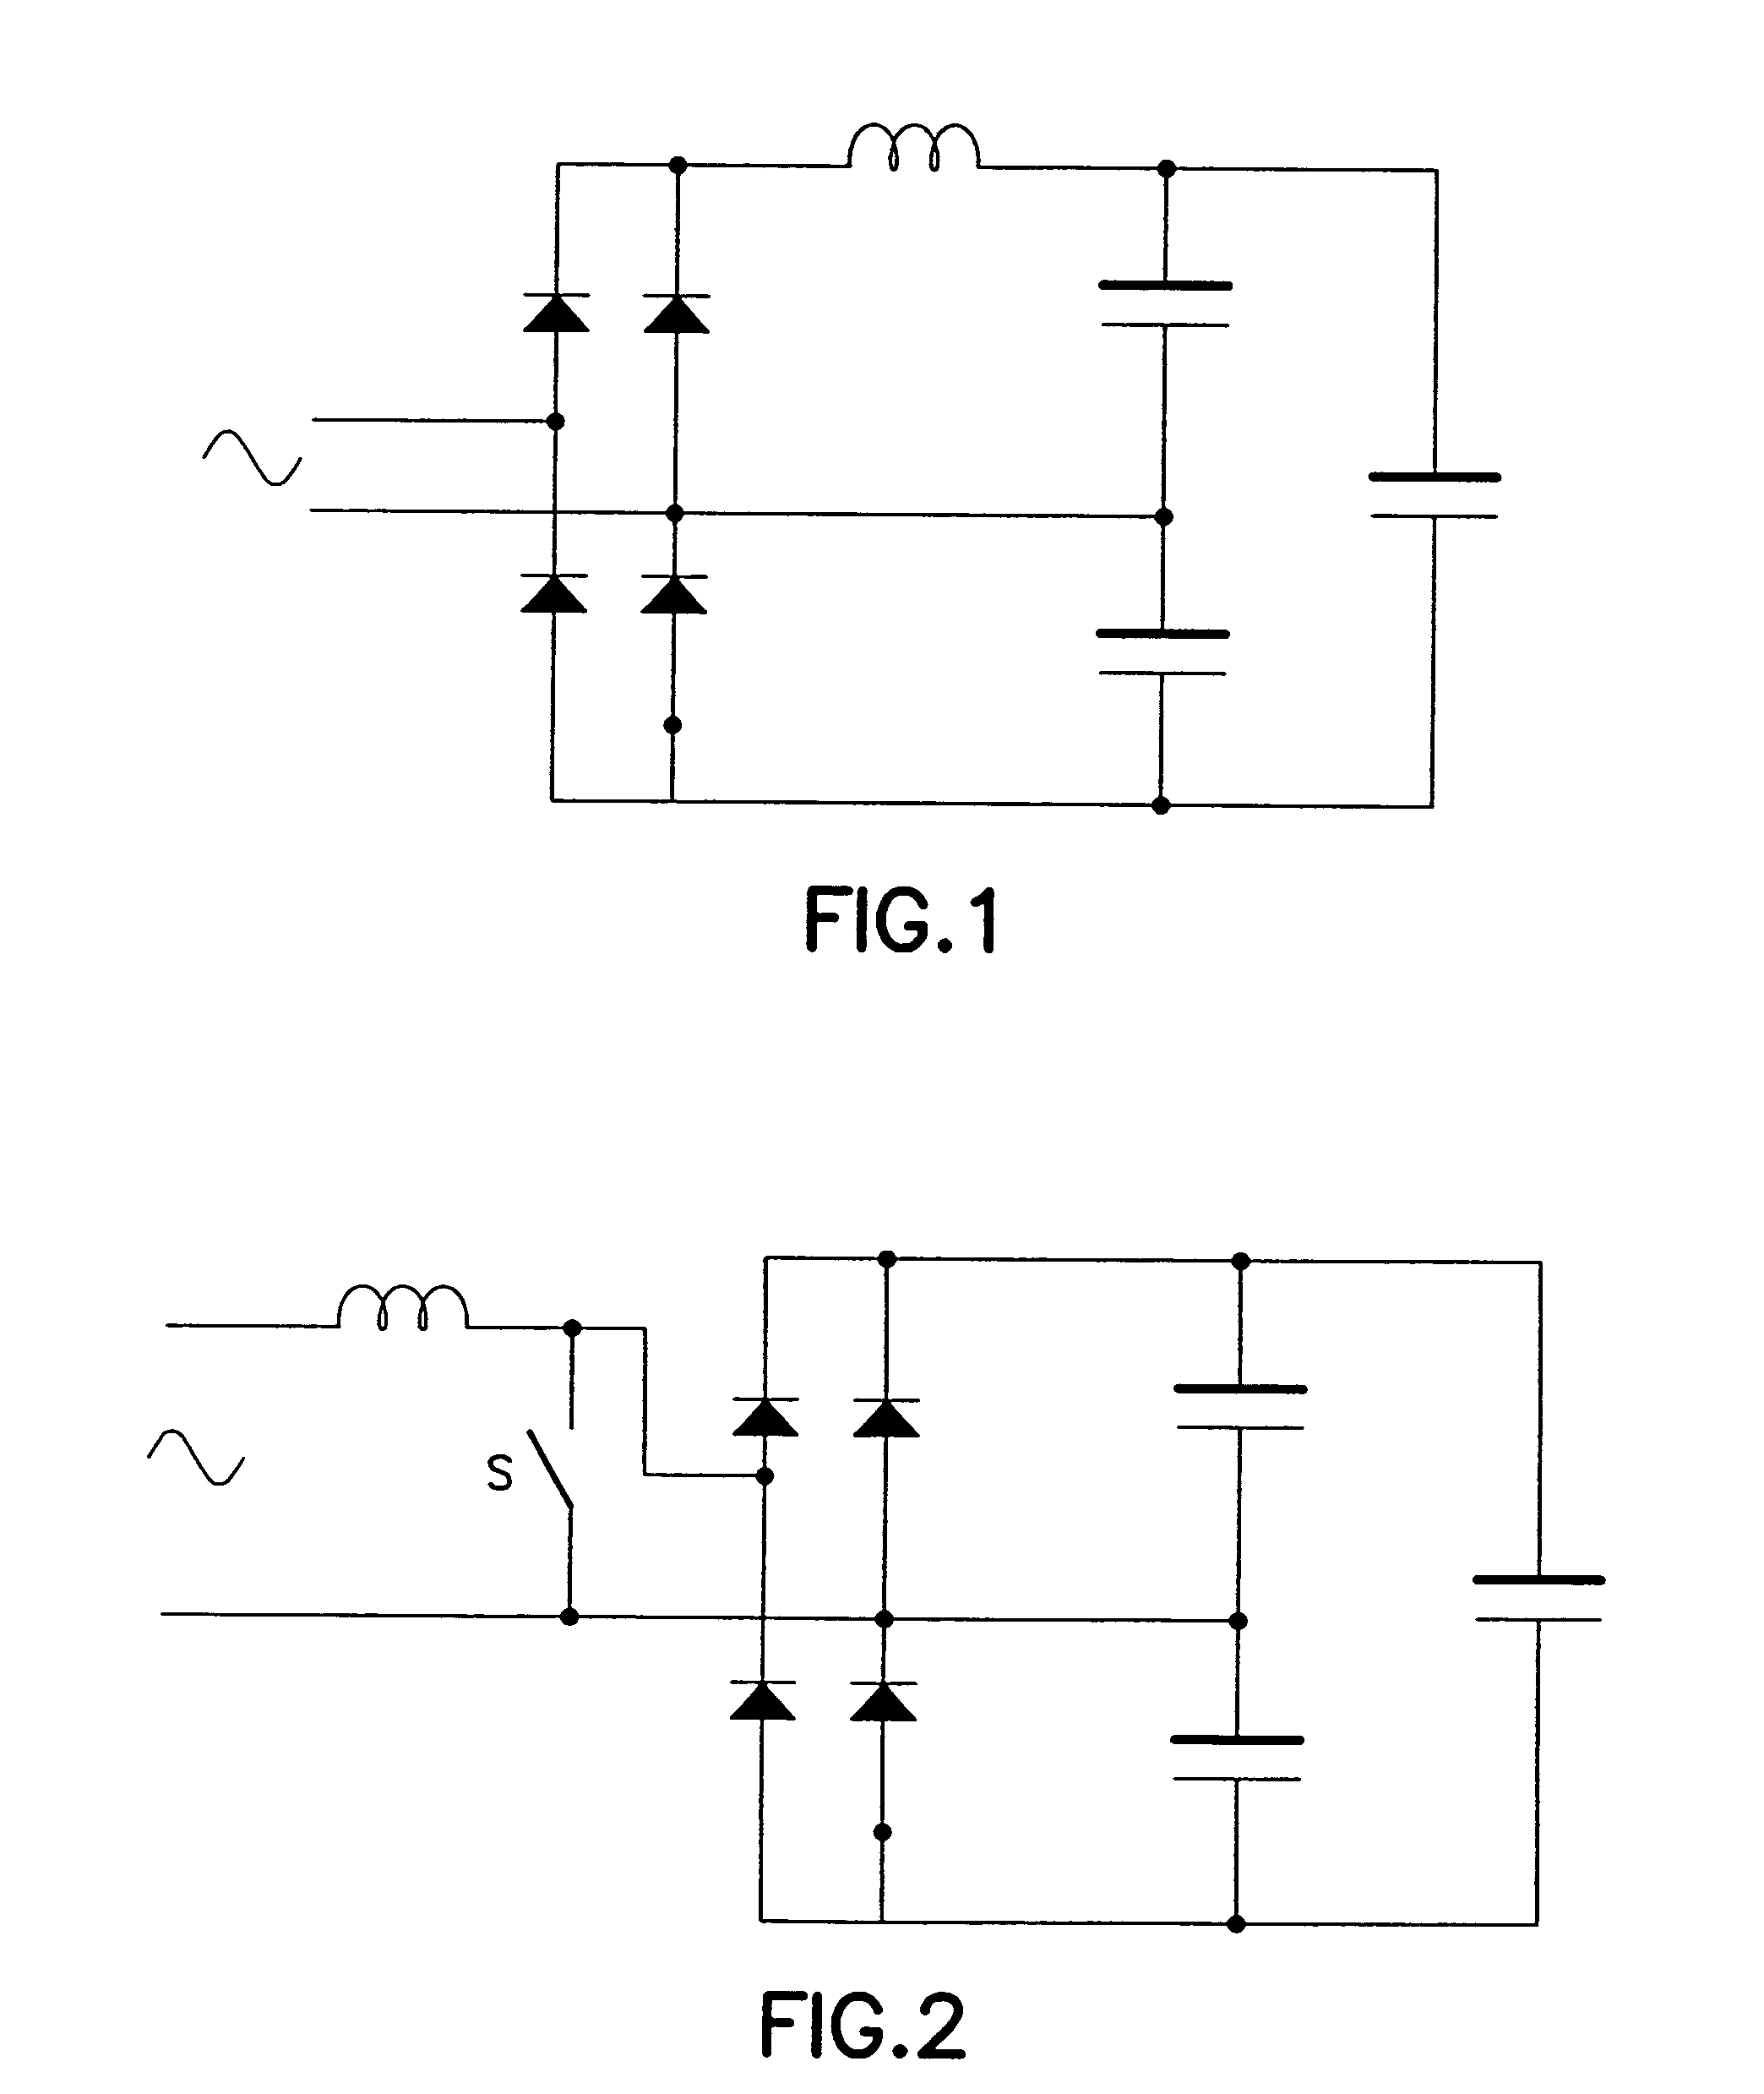 High frequency partial boost power factor correction control circuit and method